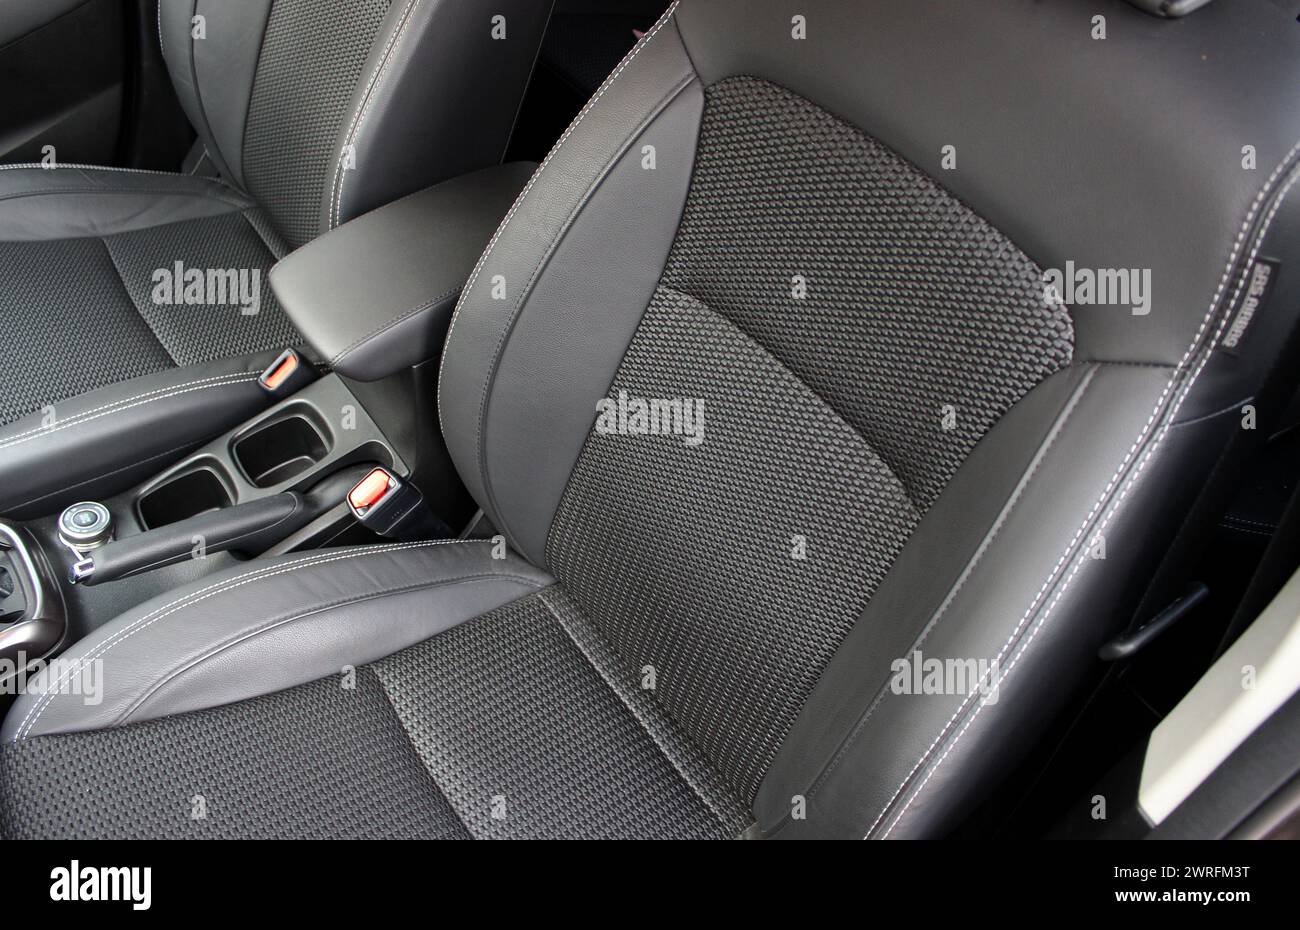 Eco-Leather And Fiber Design Elements Of Car Seats Upholstery Stock Photo